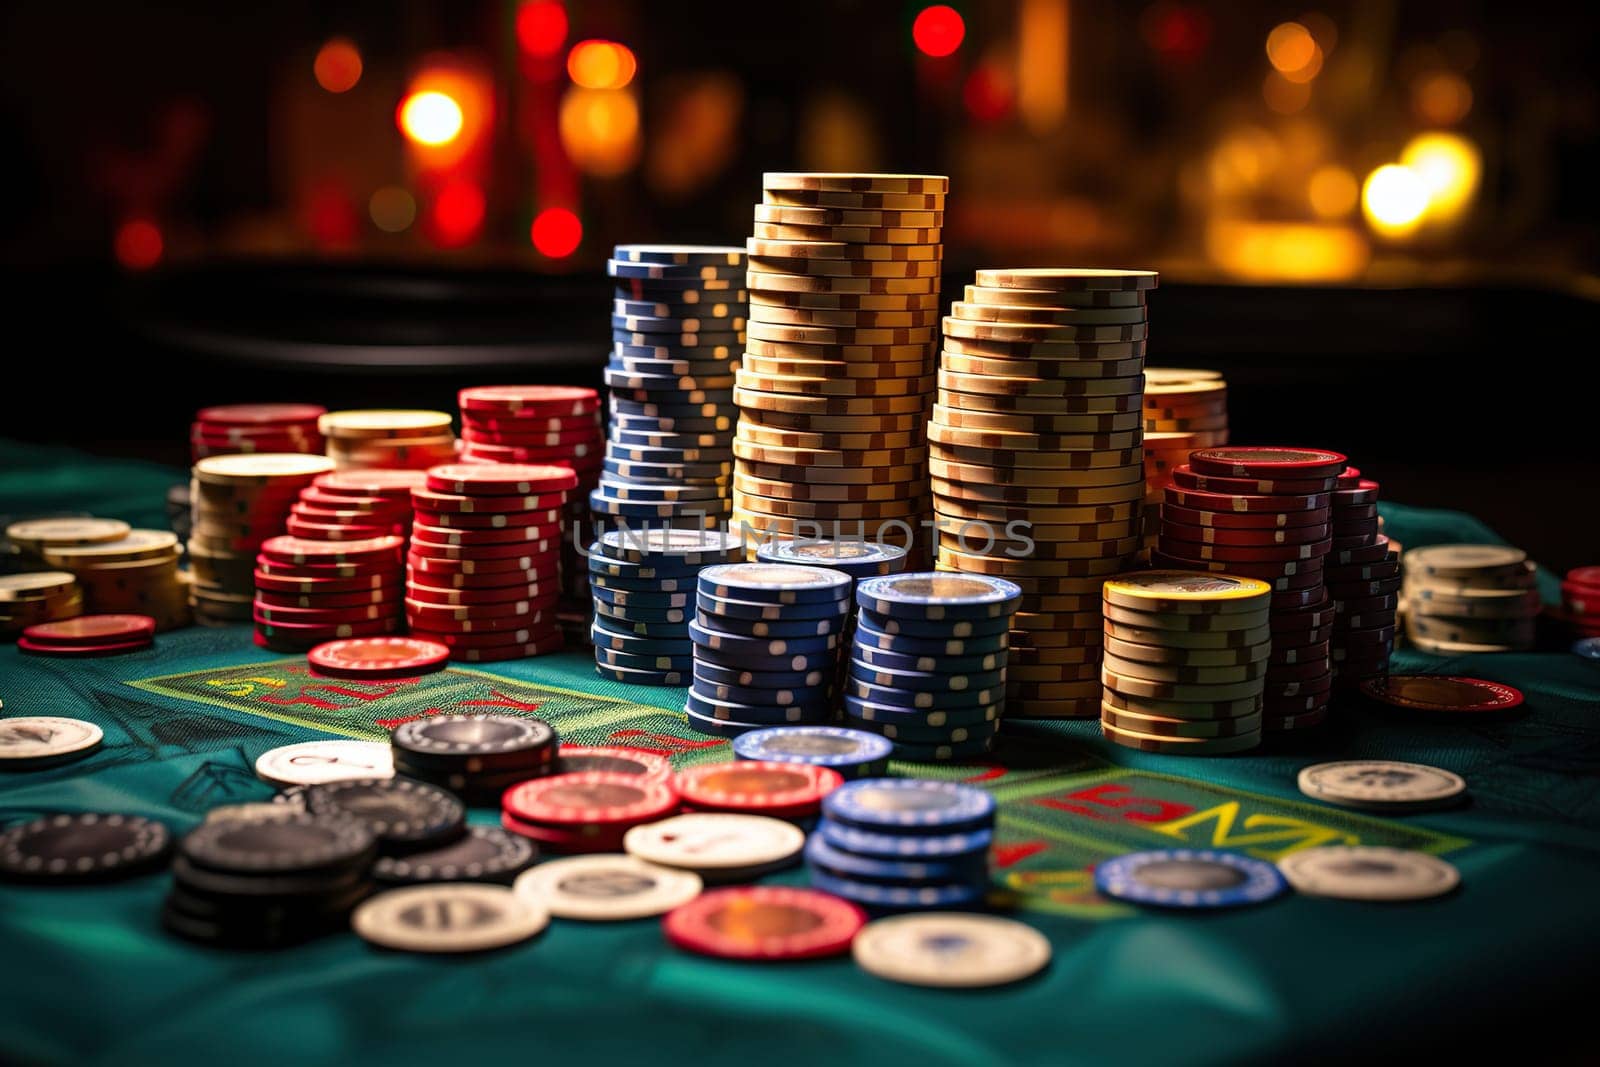 Gaming table with stacks of chips on a blurred background. Gambling concept.